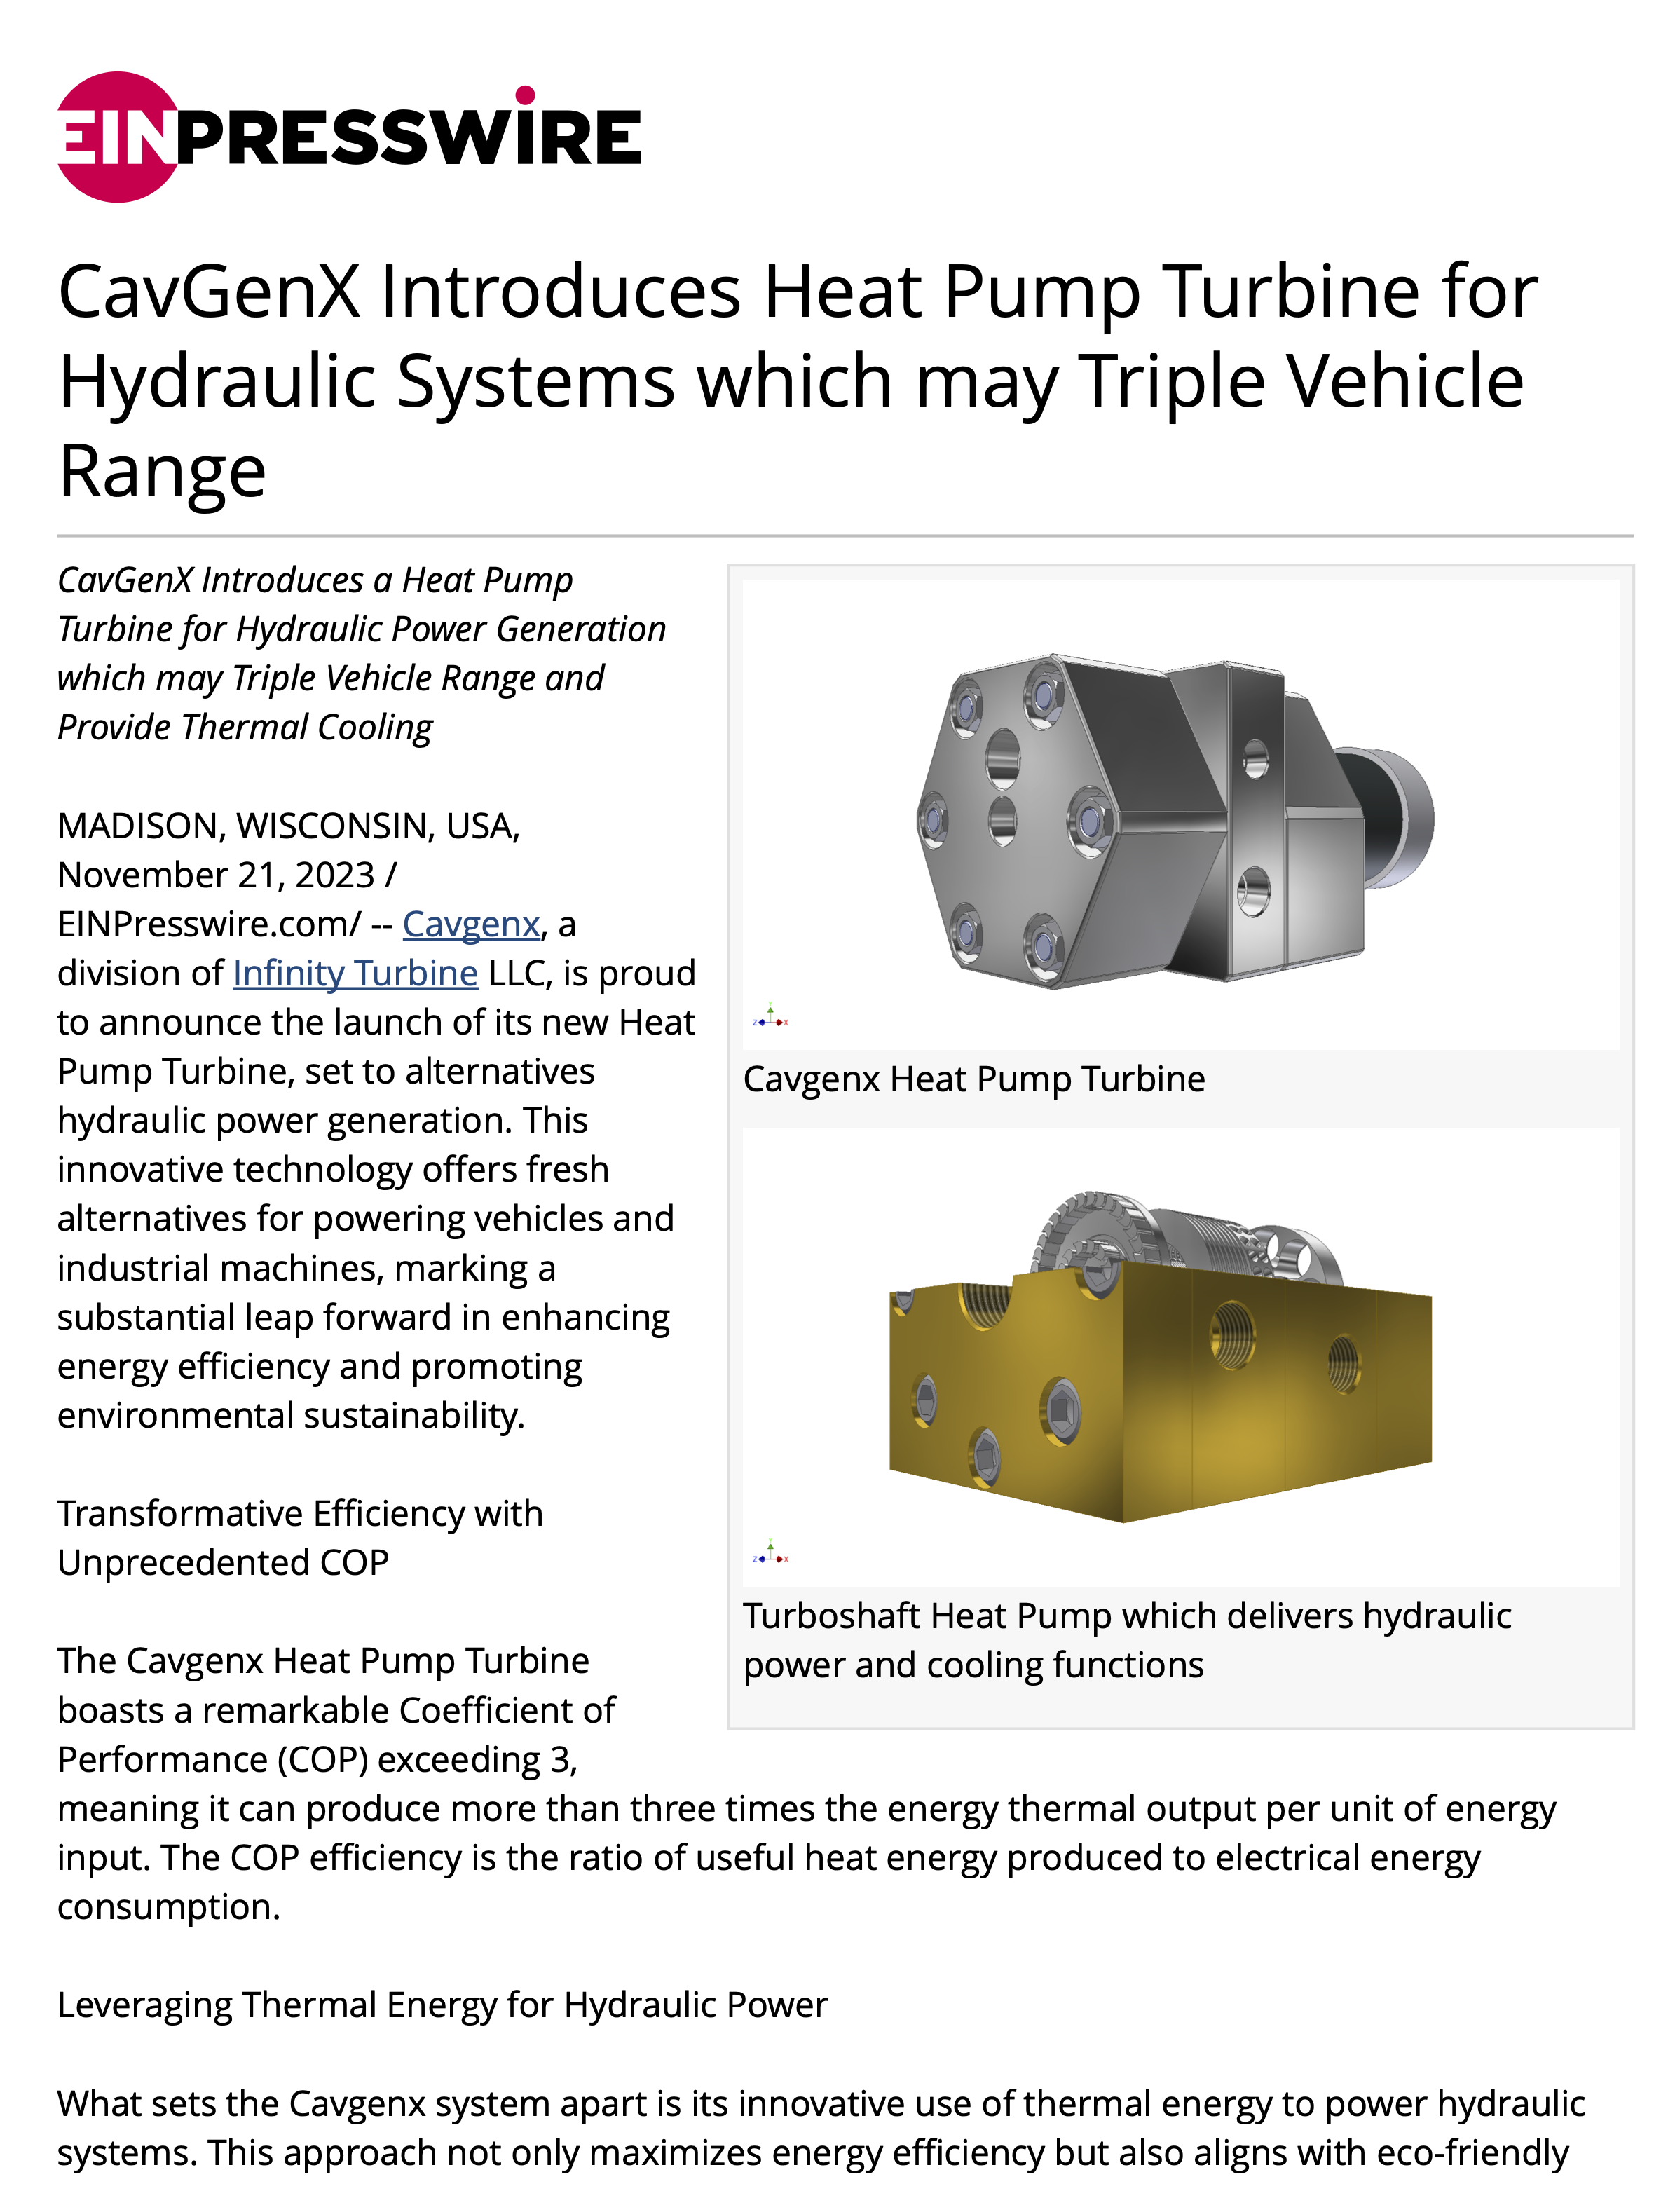 CavGenX Introduces Heat Pump Turbine for Hydraulic Systems which may Triple Vehicle Range